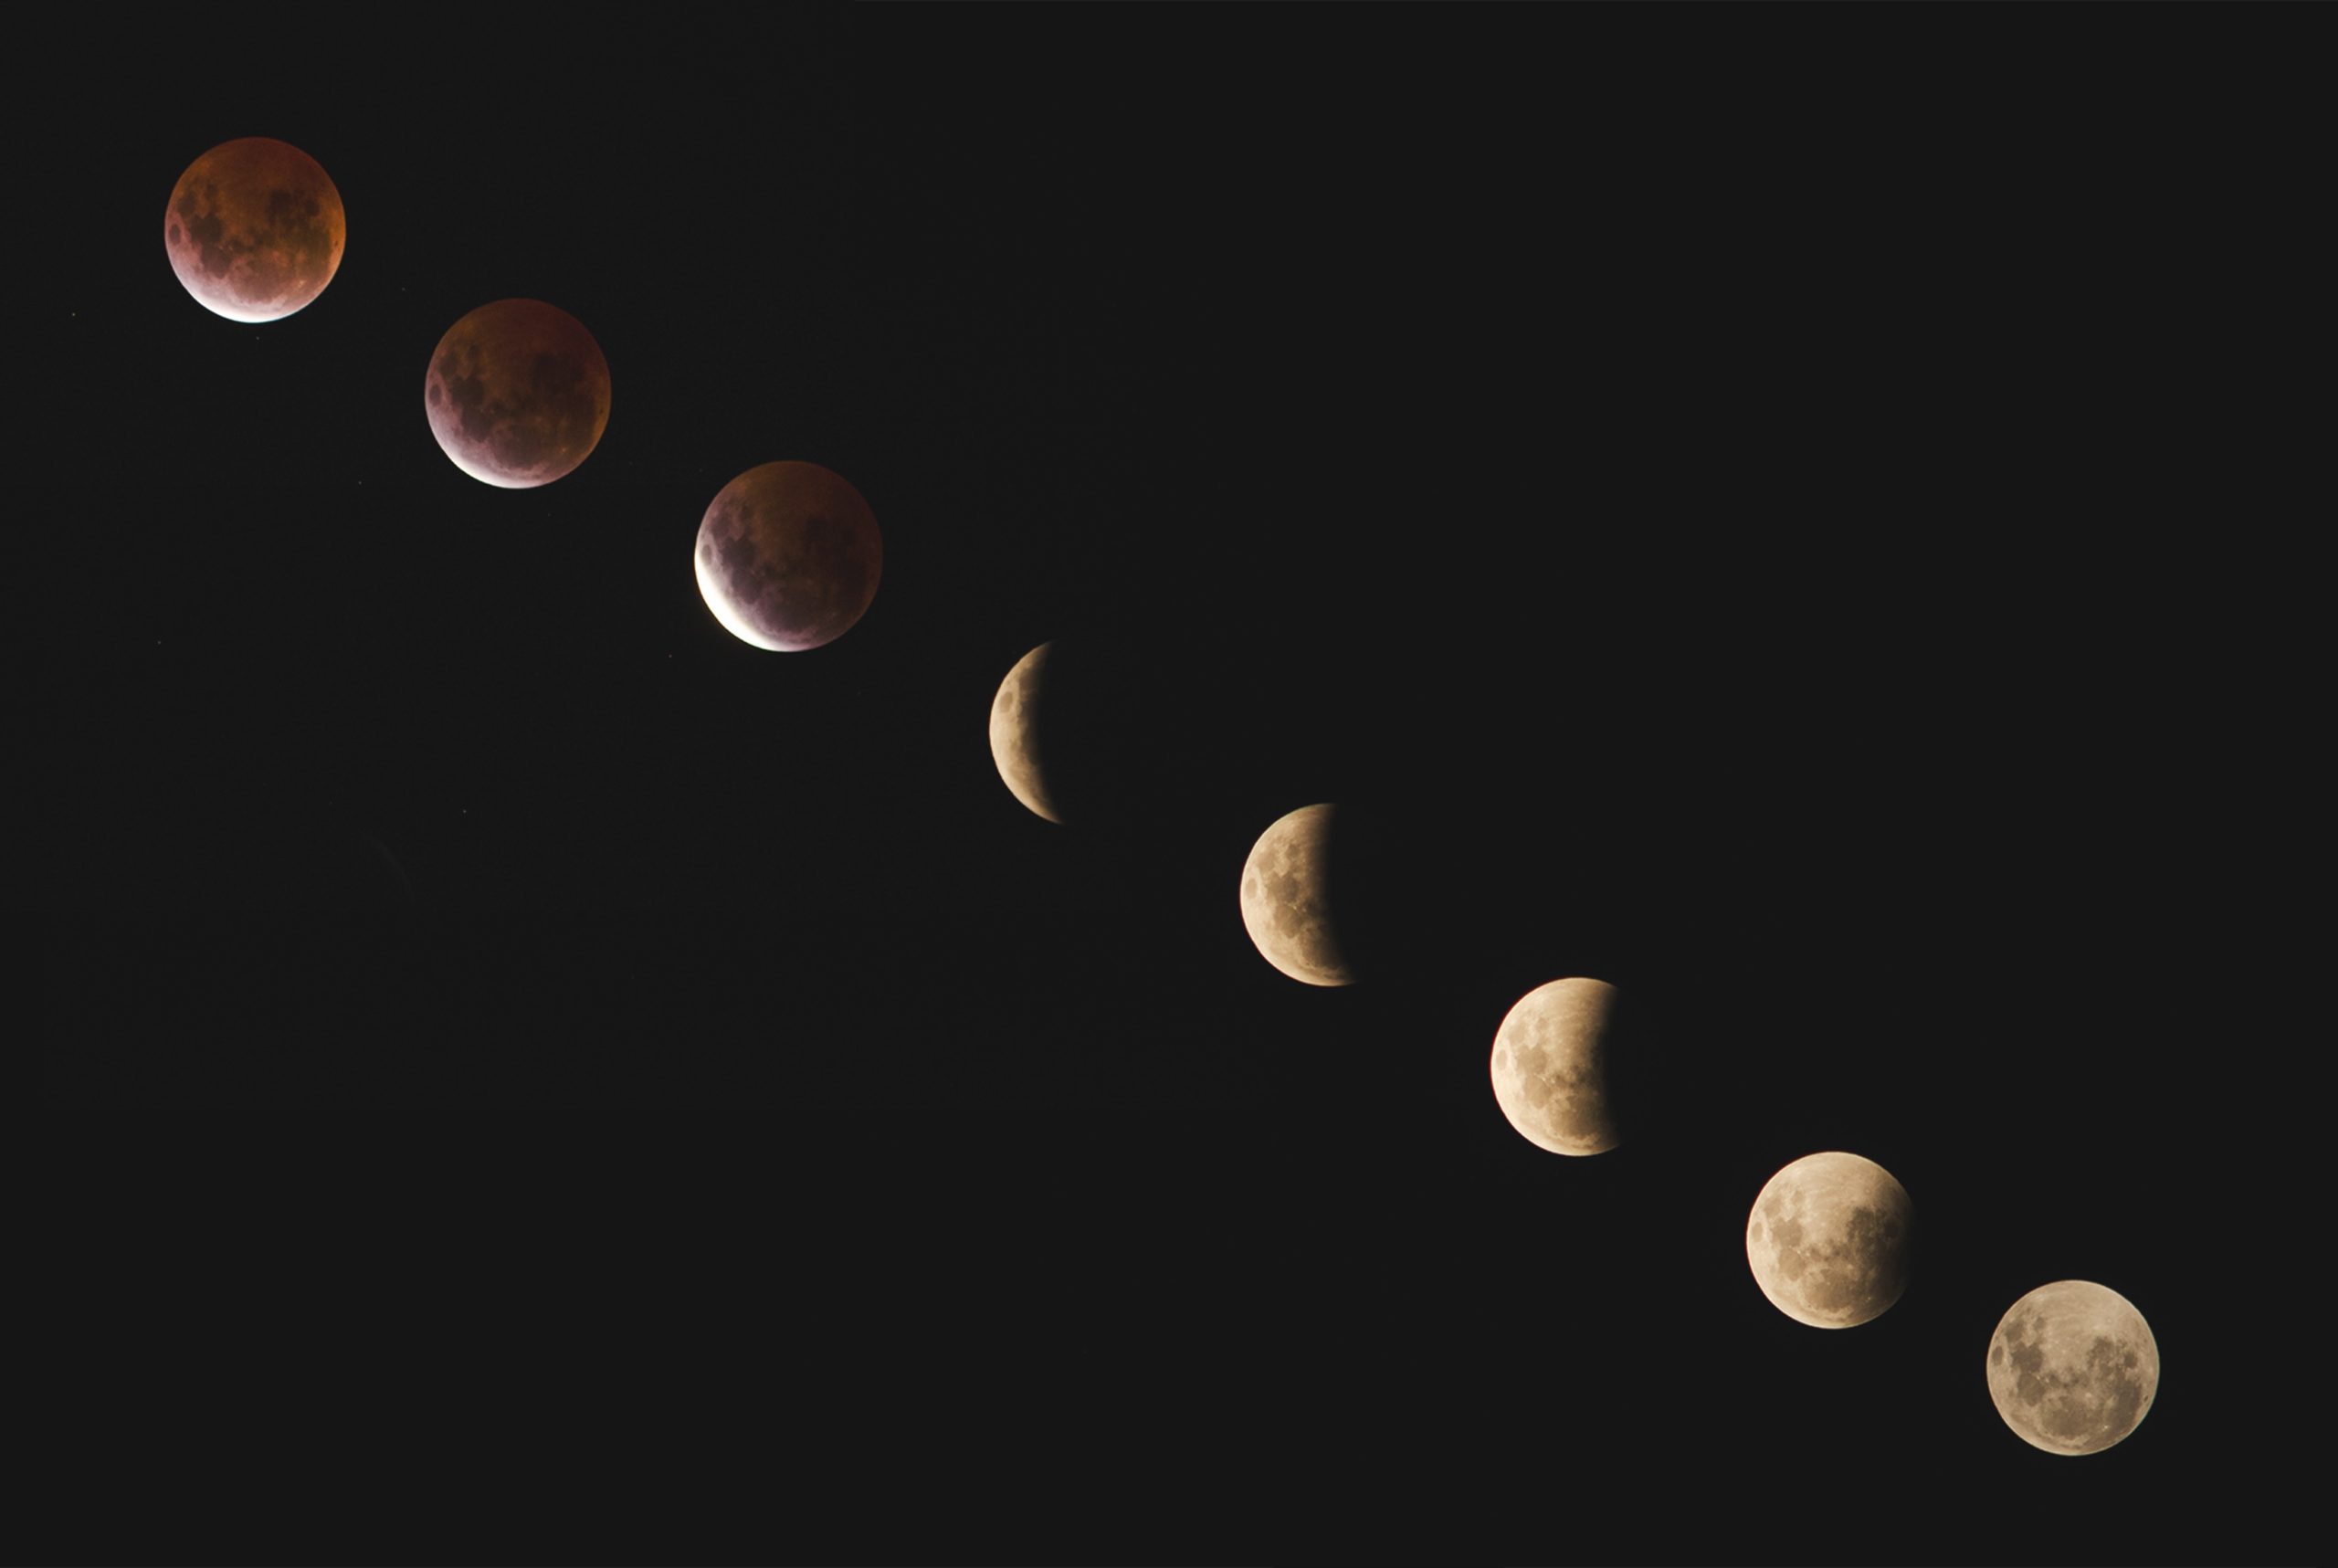 The various moon phases shown in the night sky